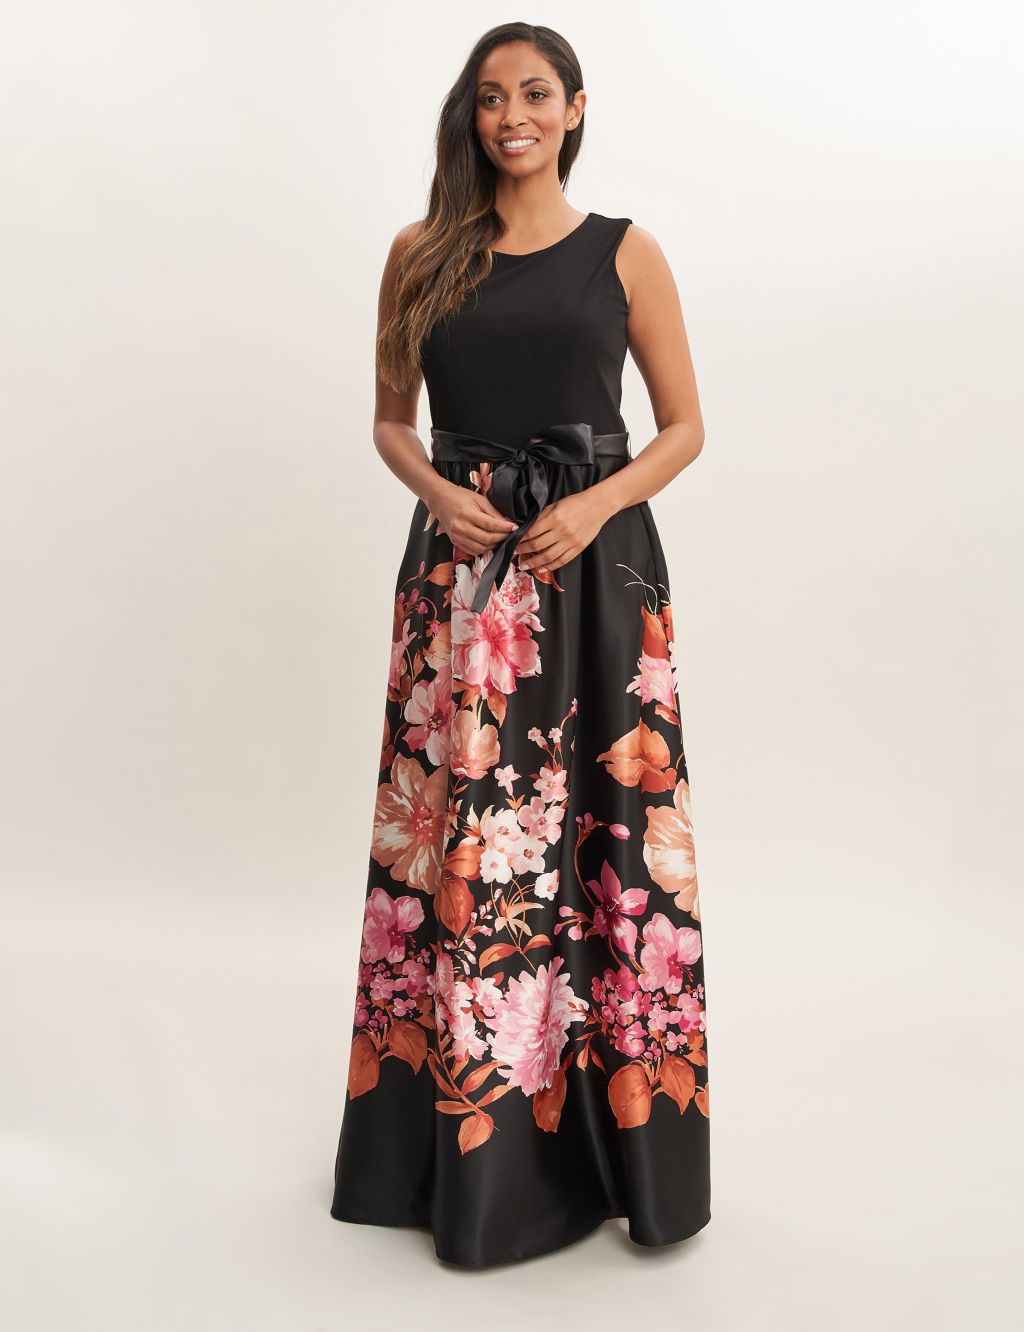 Satin and Jersey Floral Maxi Waisted Dress image 1